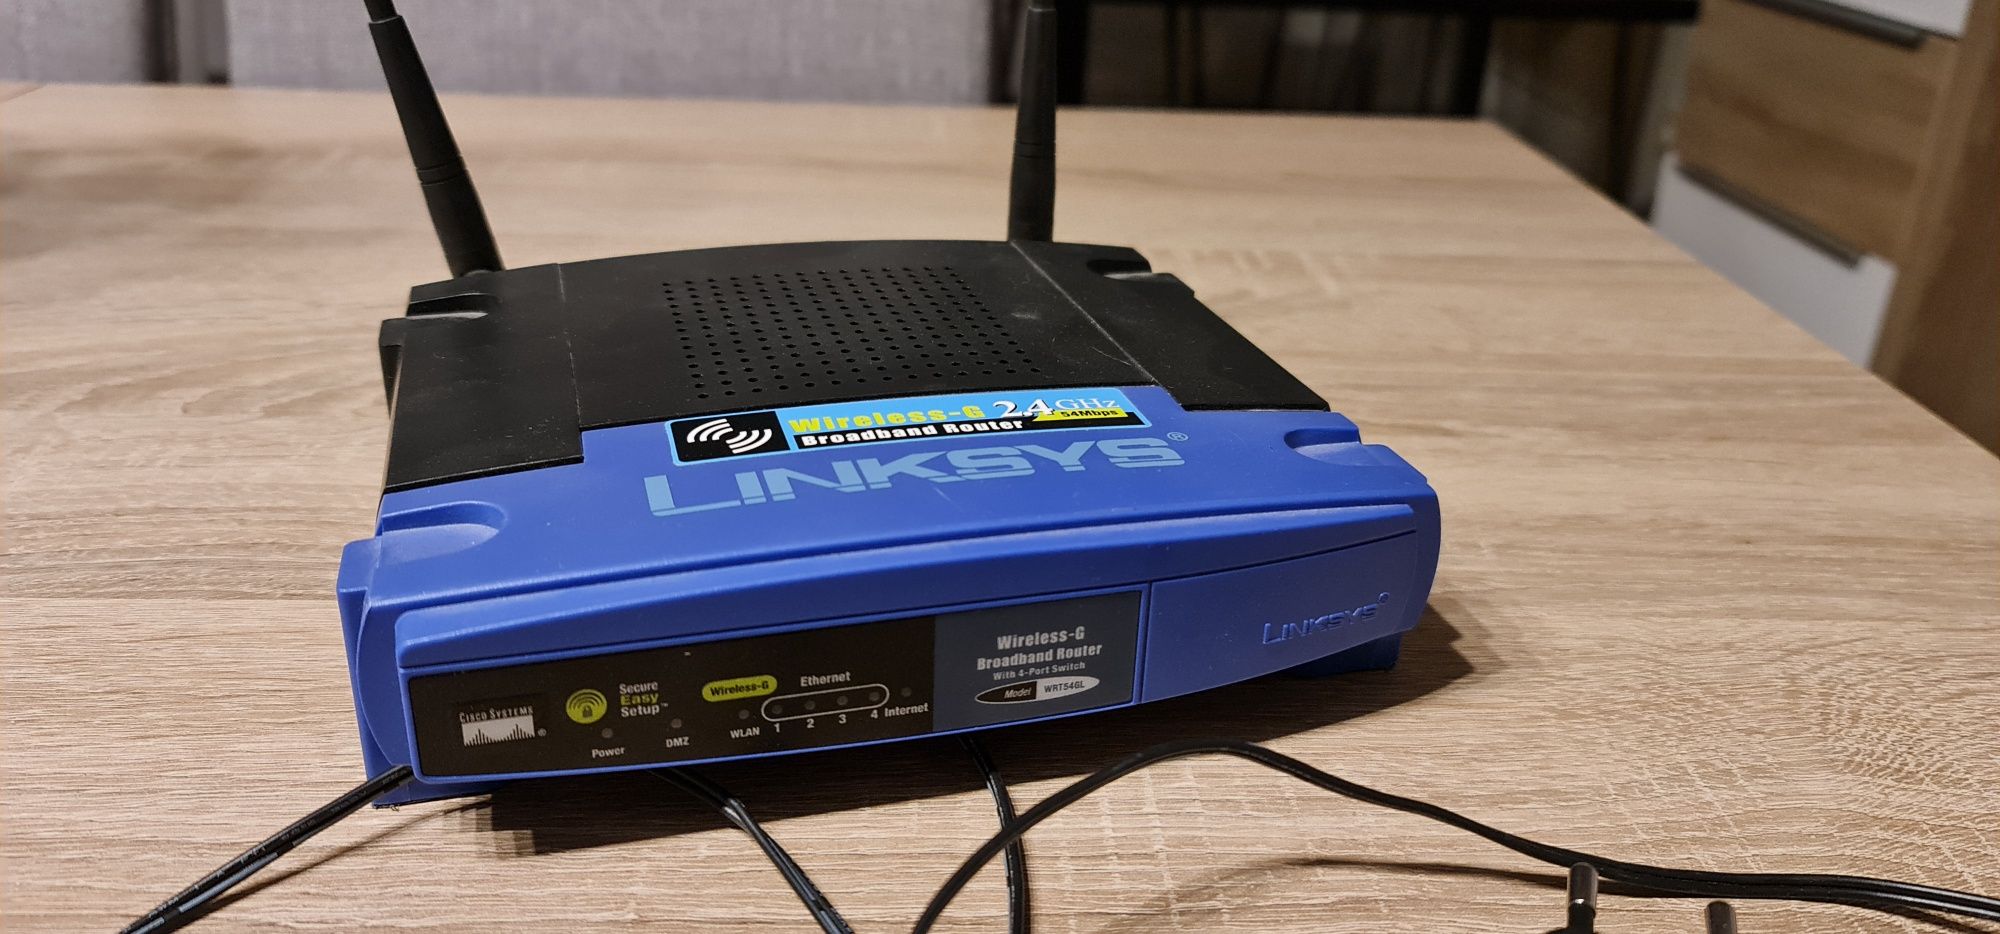 Router Linksys Wireless-G 2.4 GHz